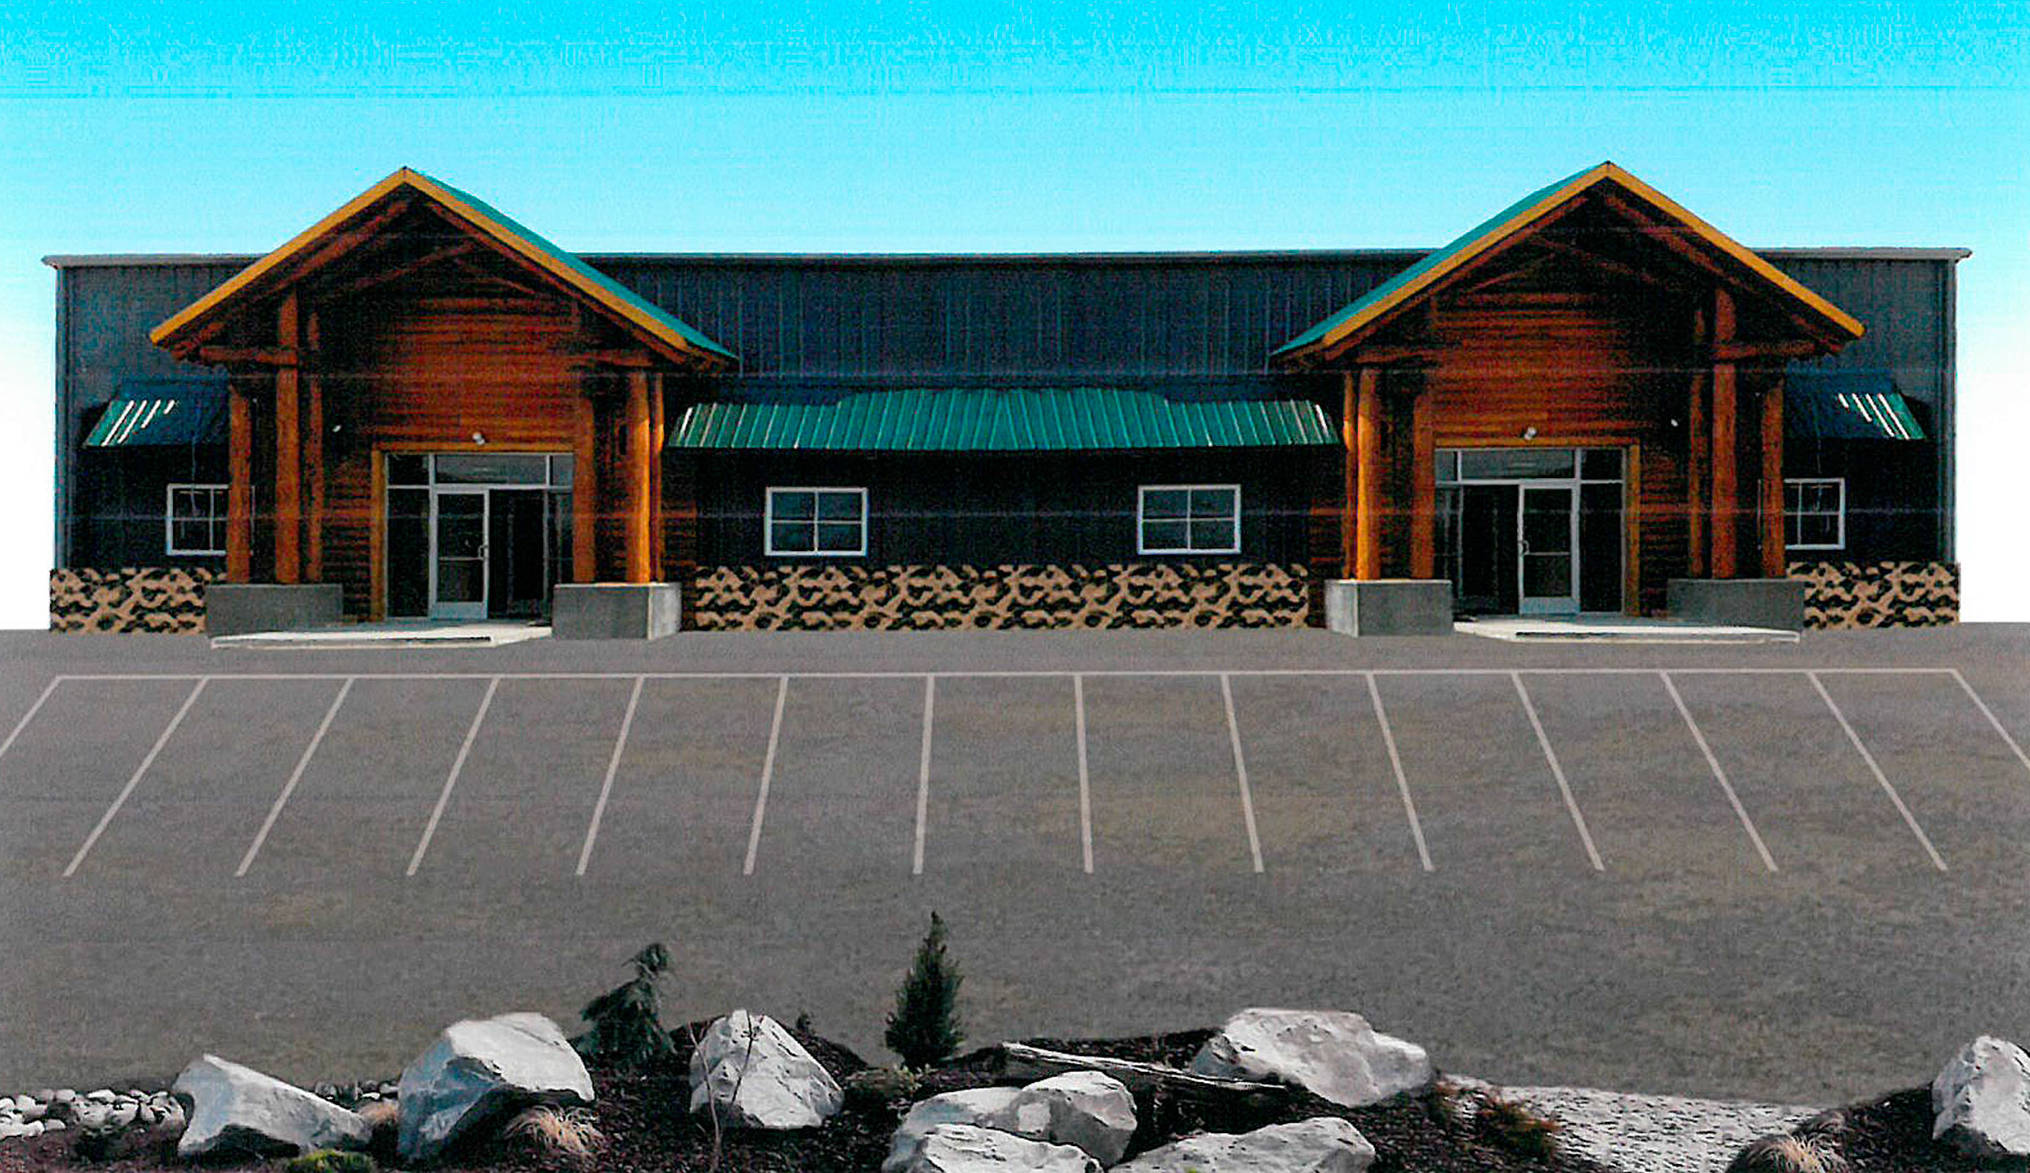 An artist’s rendering shows a 3,600-square-foot building Shipley Center officials hope to construct across East Hammond Street in Sequim within the next year.